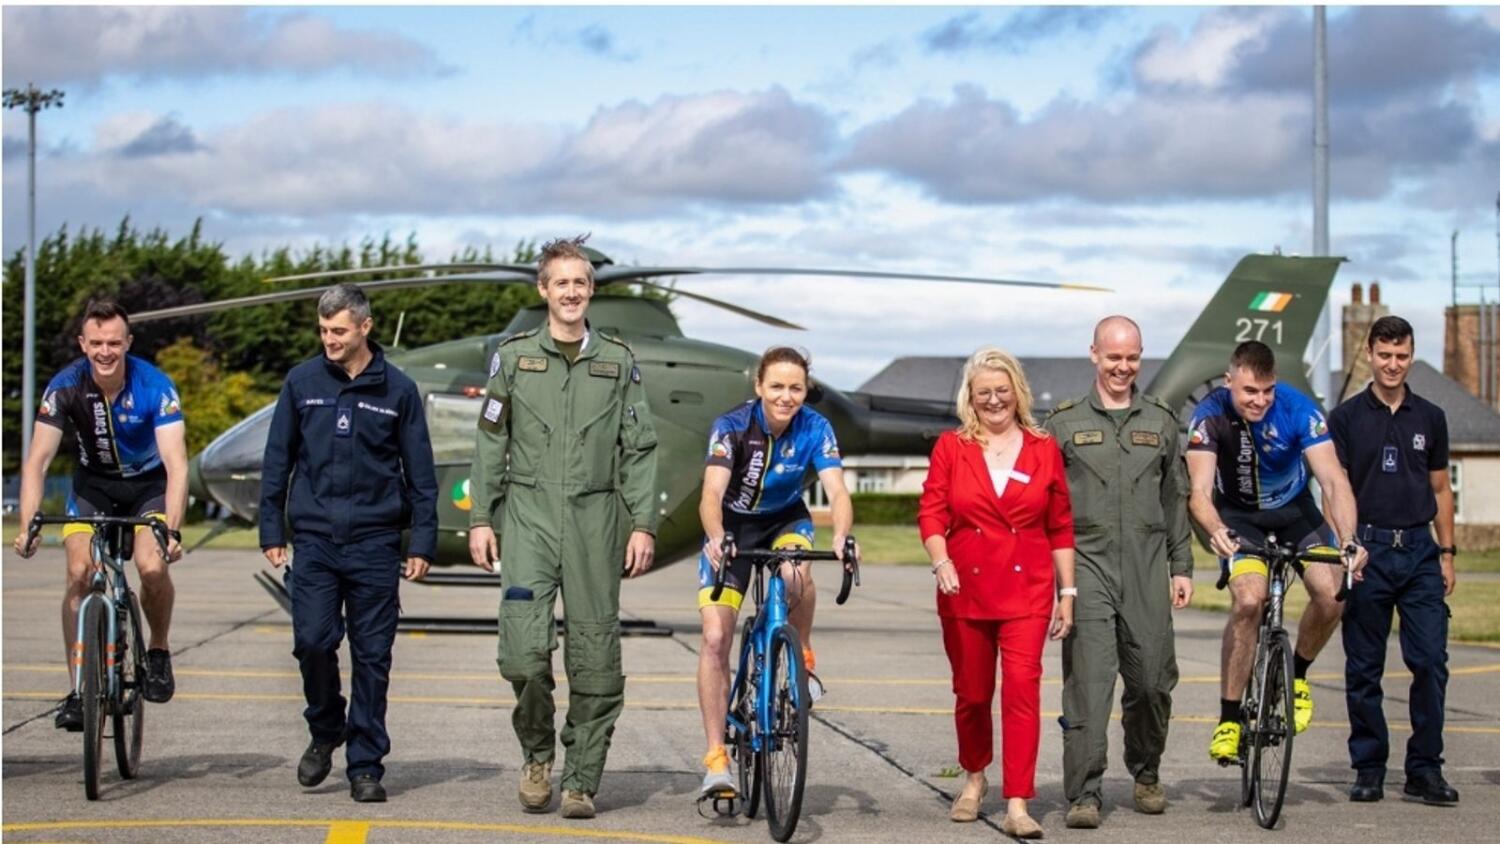 IRISH AIR CORPS CYCLE IN AID OF CANCER SUPPORT SANCTUARY